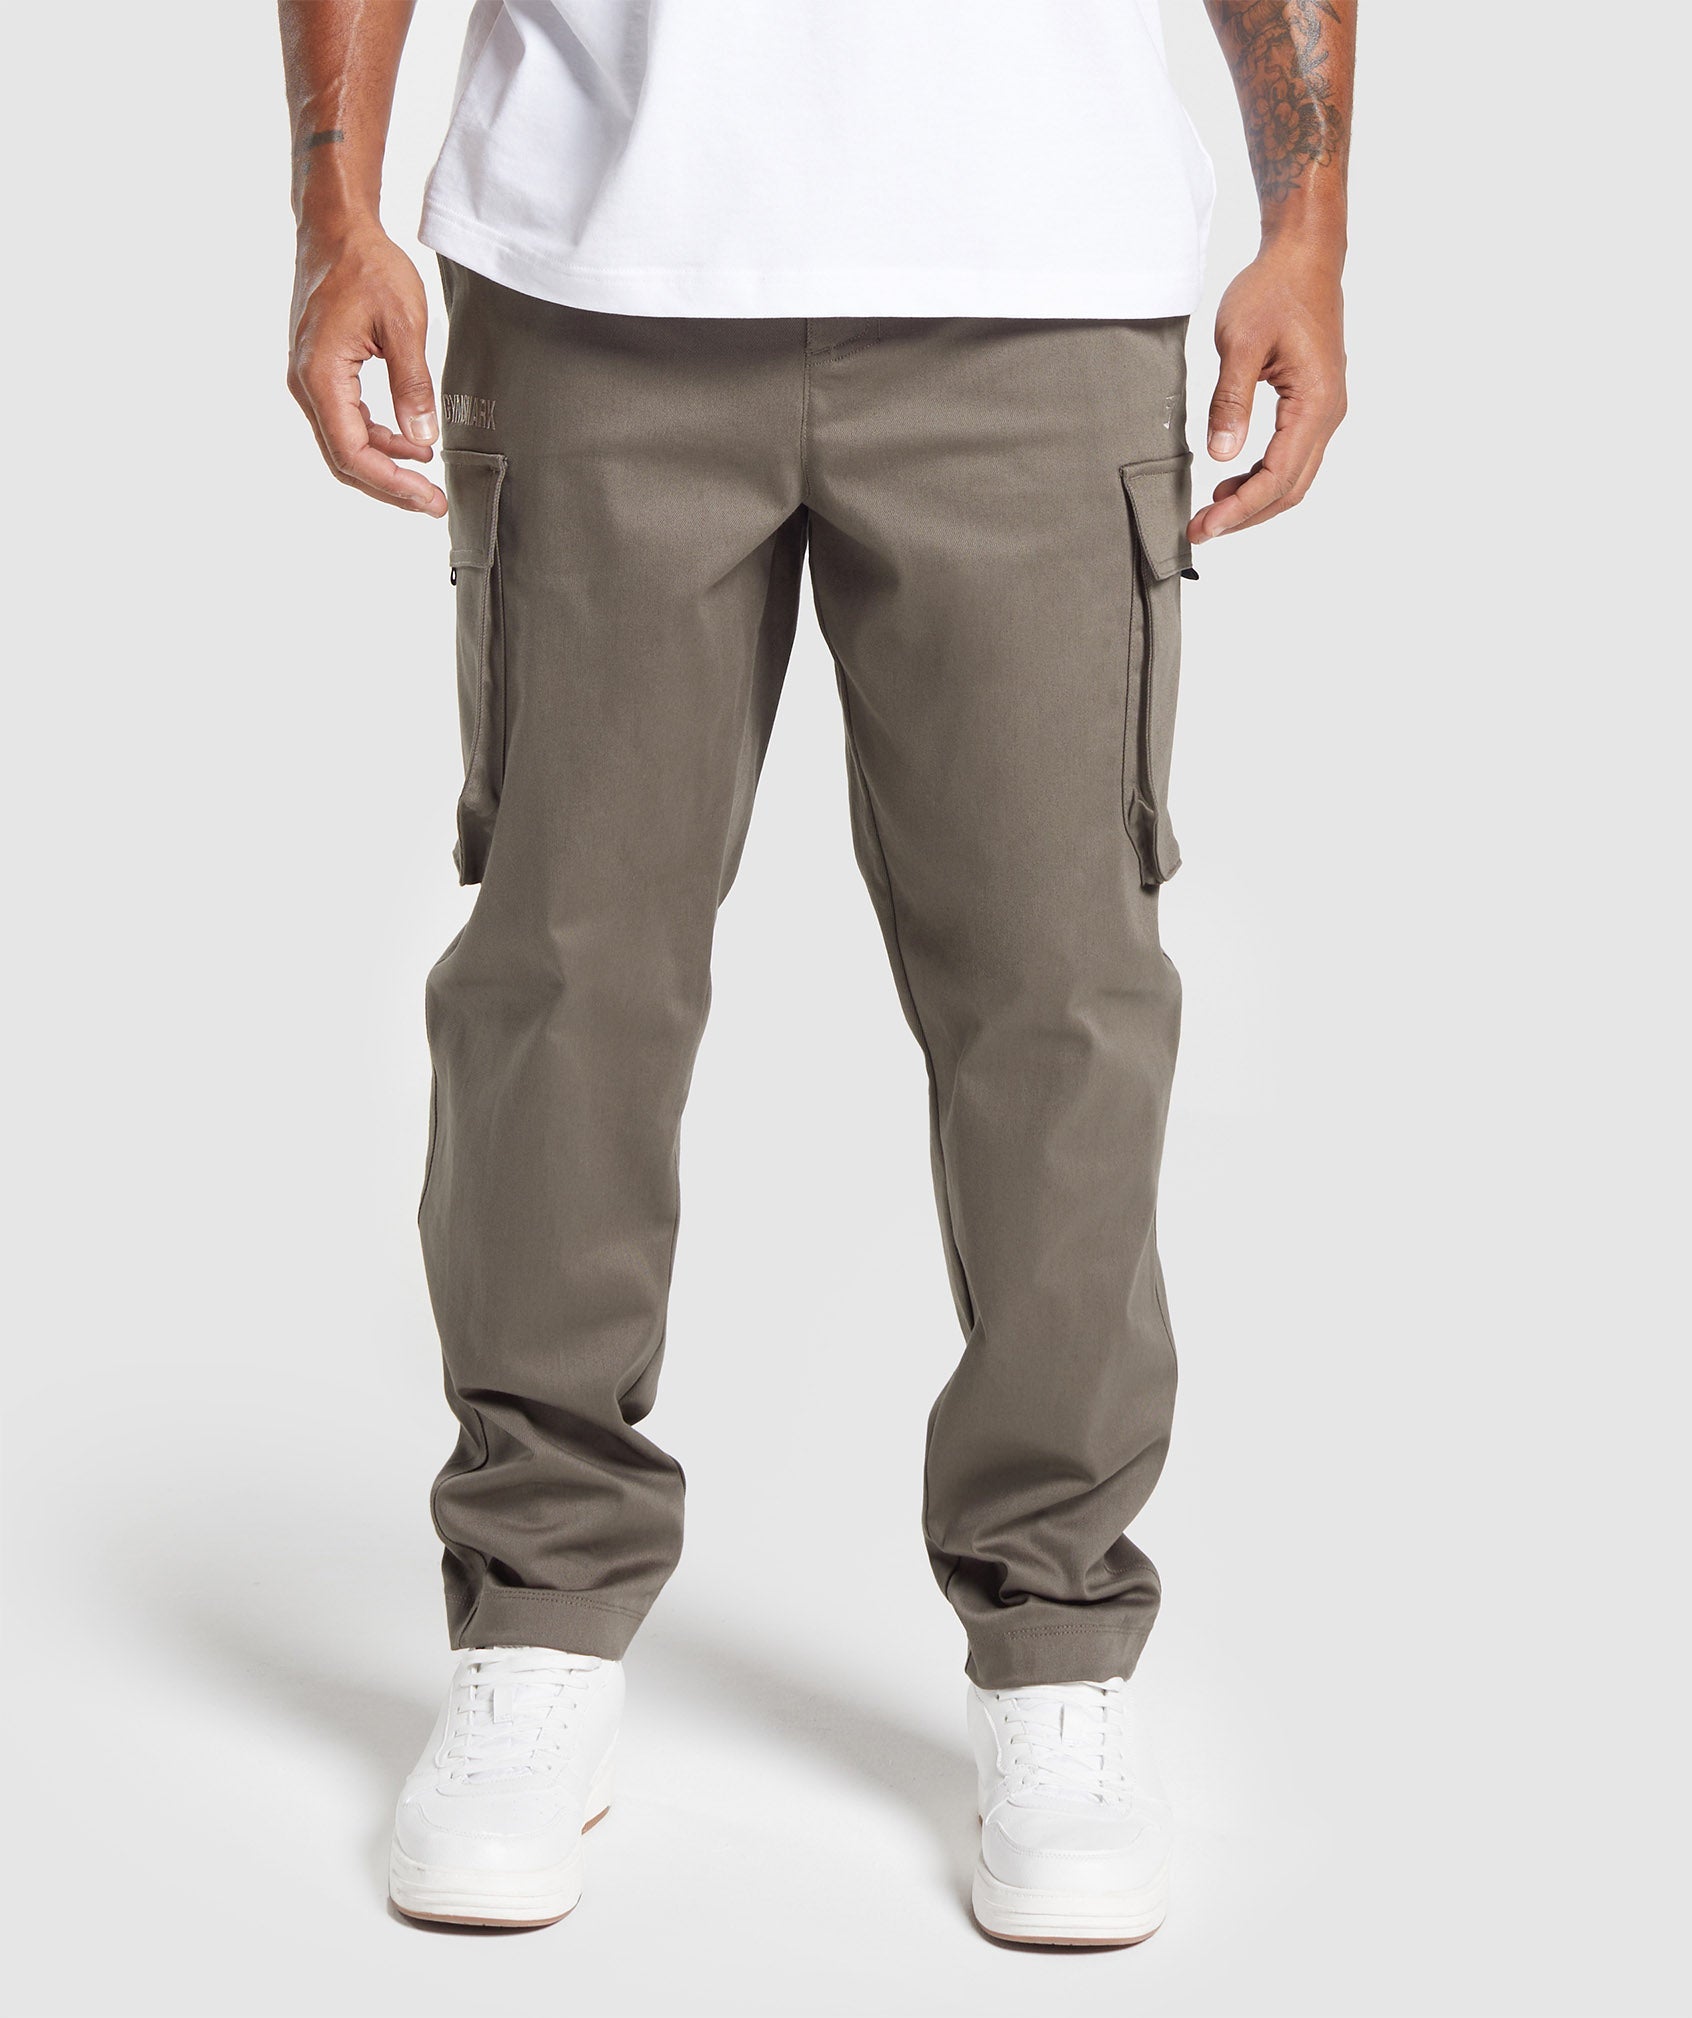 Rest Day Woven Cargo Pants in Camo Brown - view 2